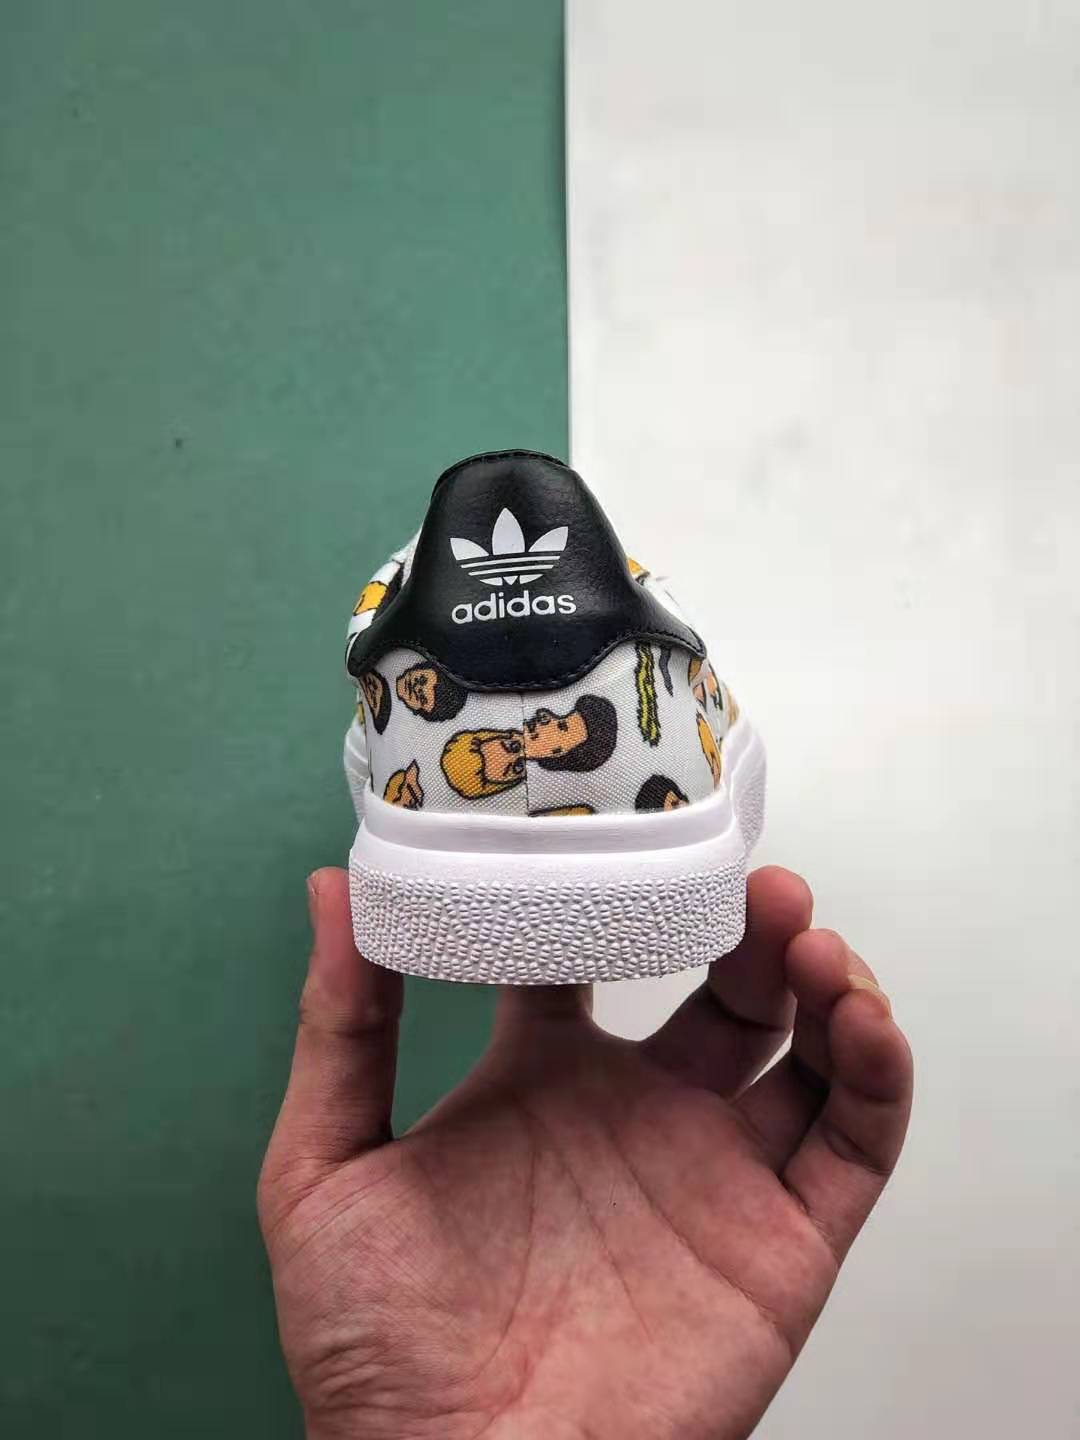 Adidas Beavis and Butthead x 3MC Vulc Cloud White F35088 – Limited Edition Collaboration